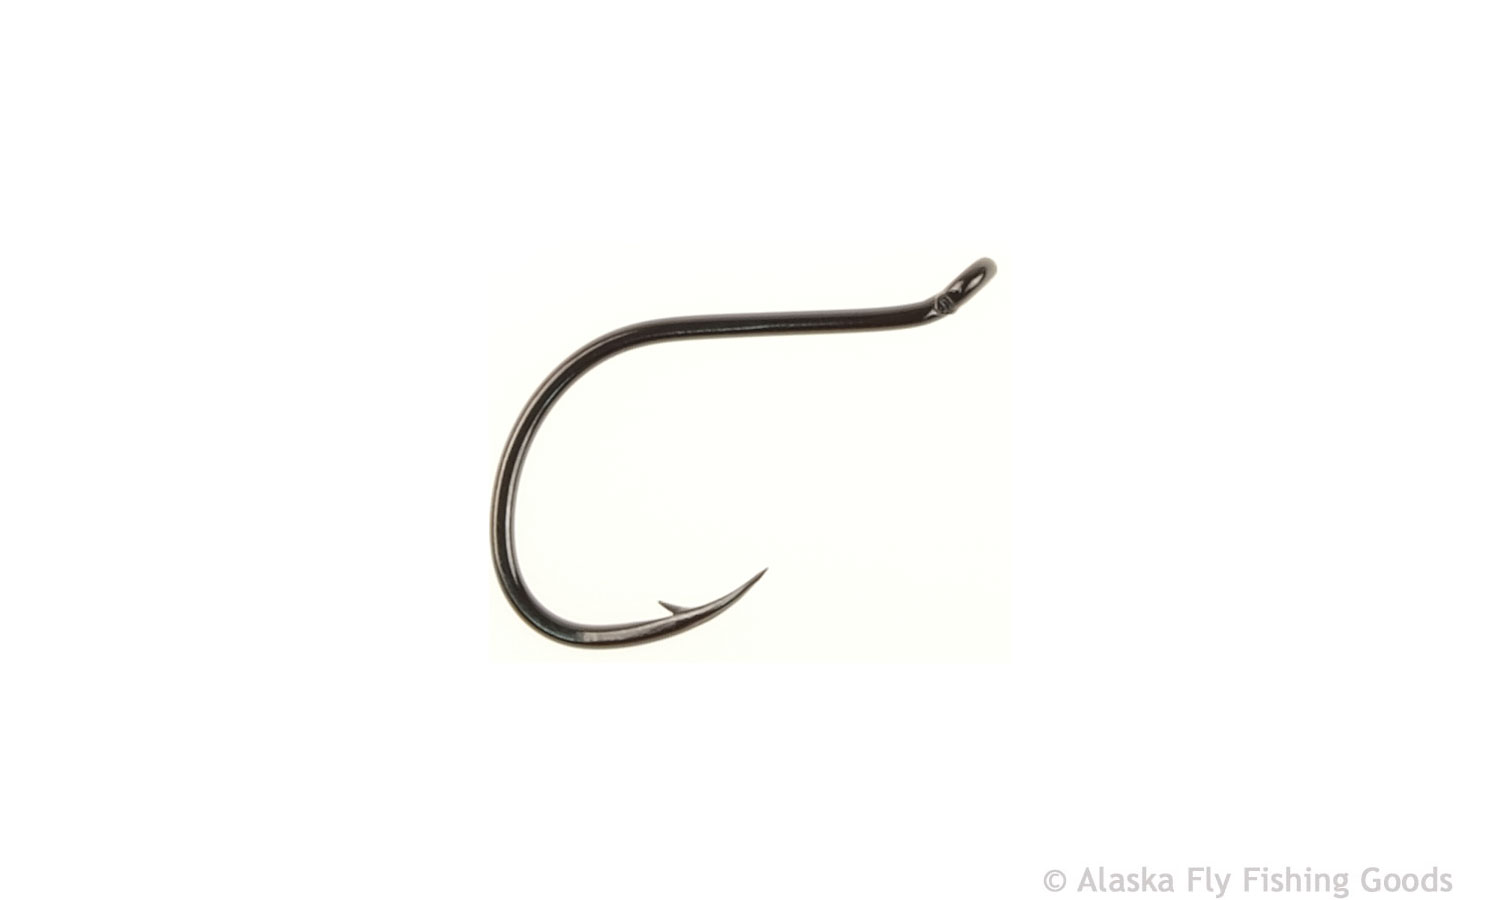 Alaska Fly Fishing Goods - Owner SSW Cutting Point Hook